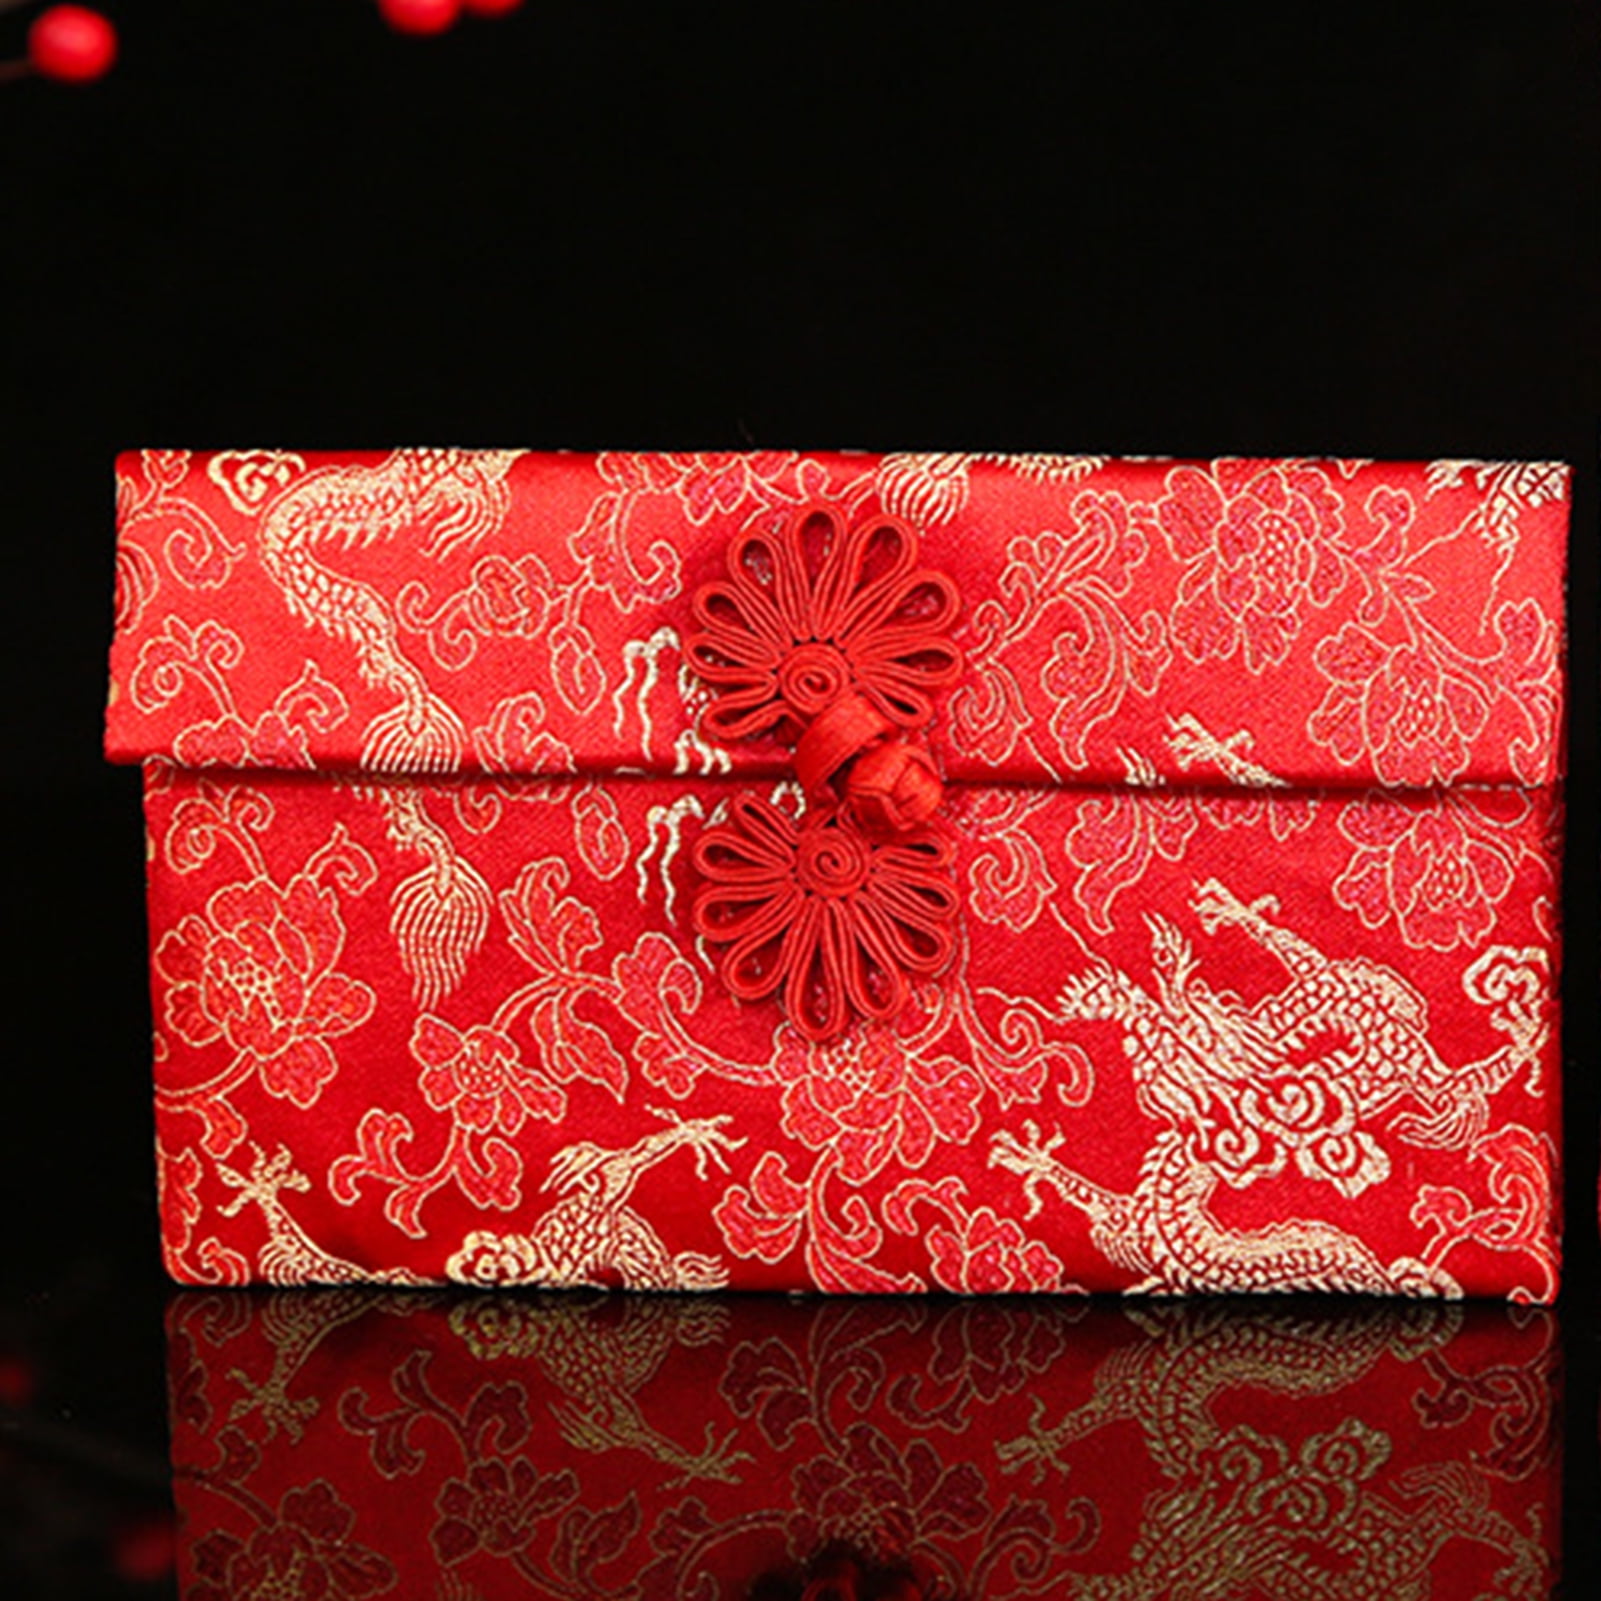 The Significance of Red Envelopes in Chinese Culture